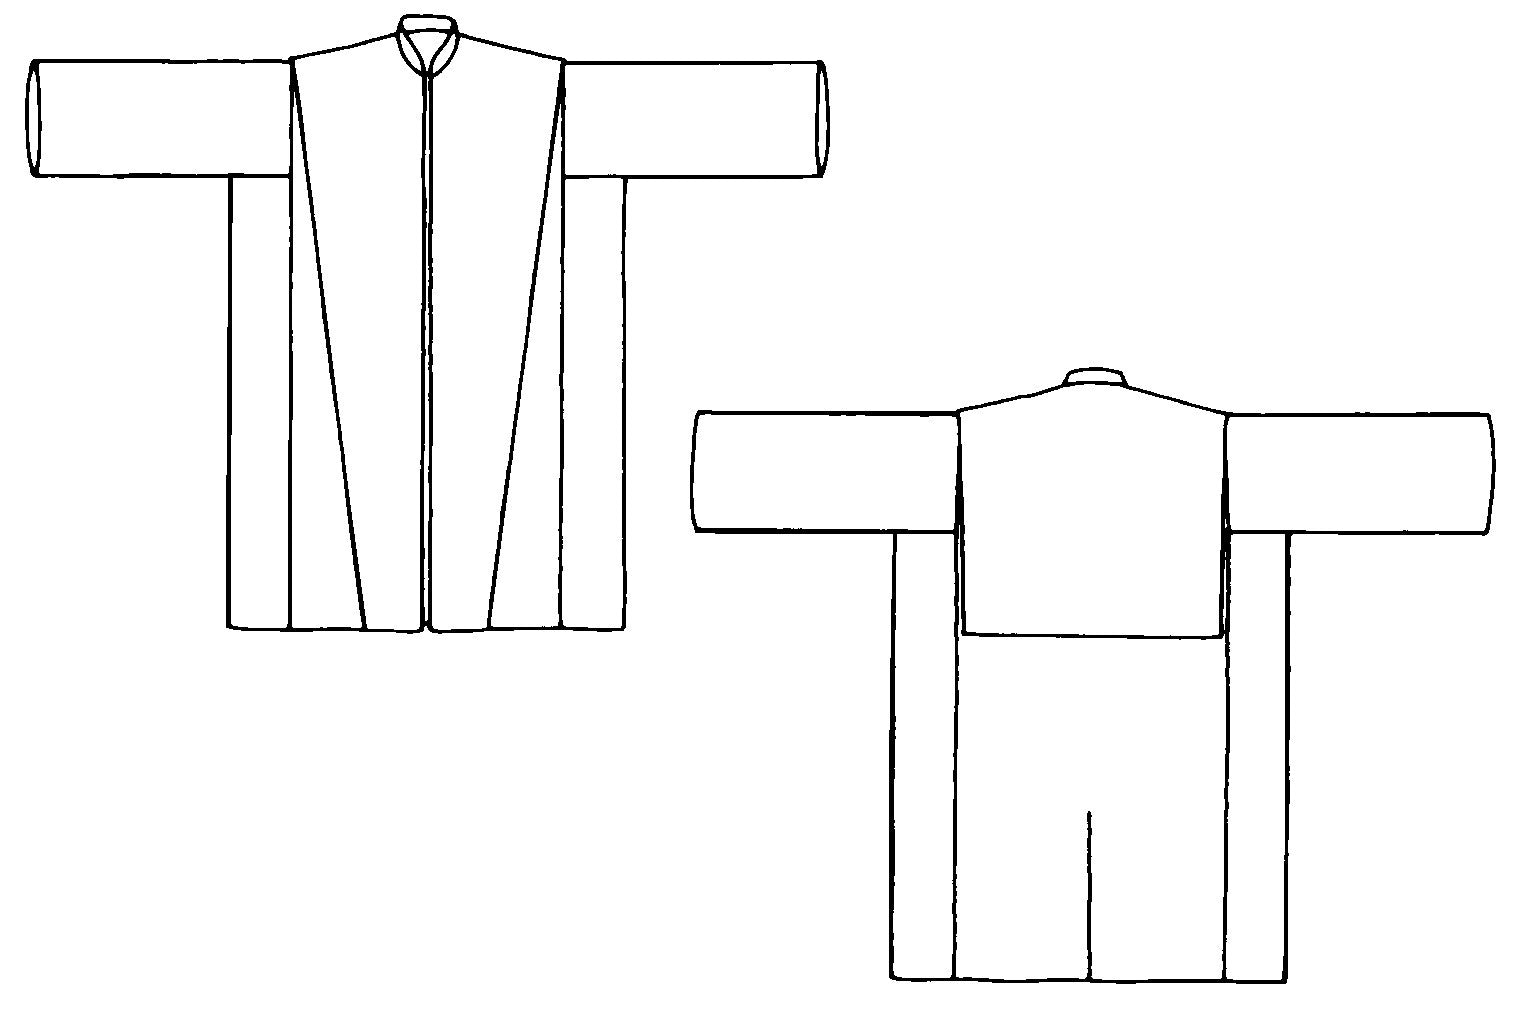 Flat line drawings of view a front view a and b and back of view A